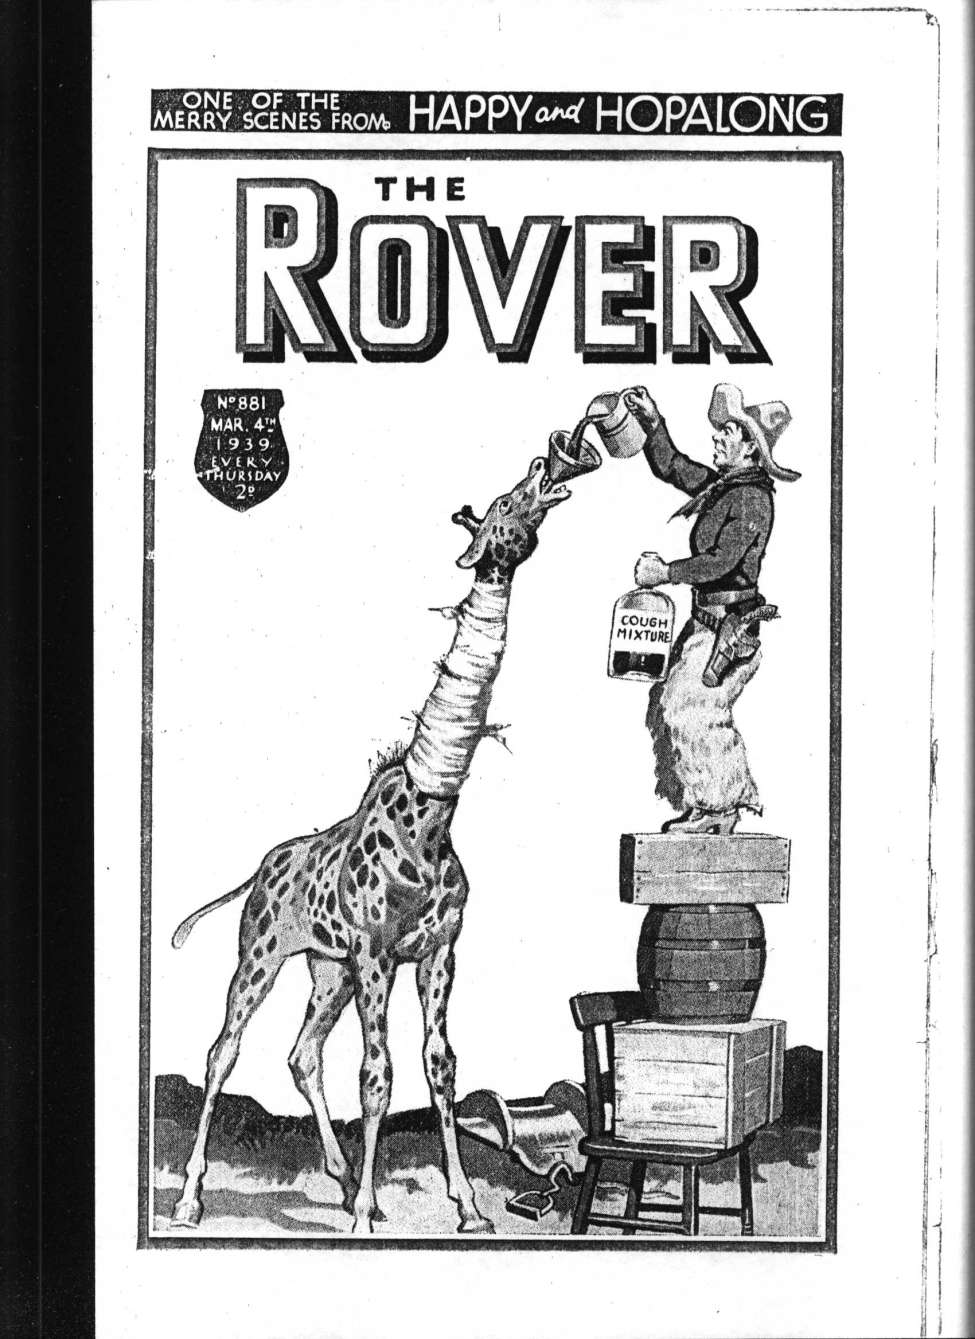 Book Cover For The Rover 881